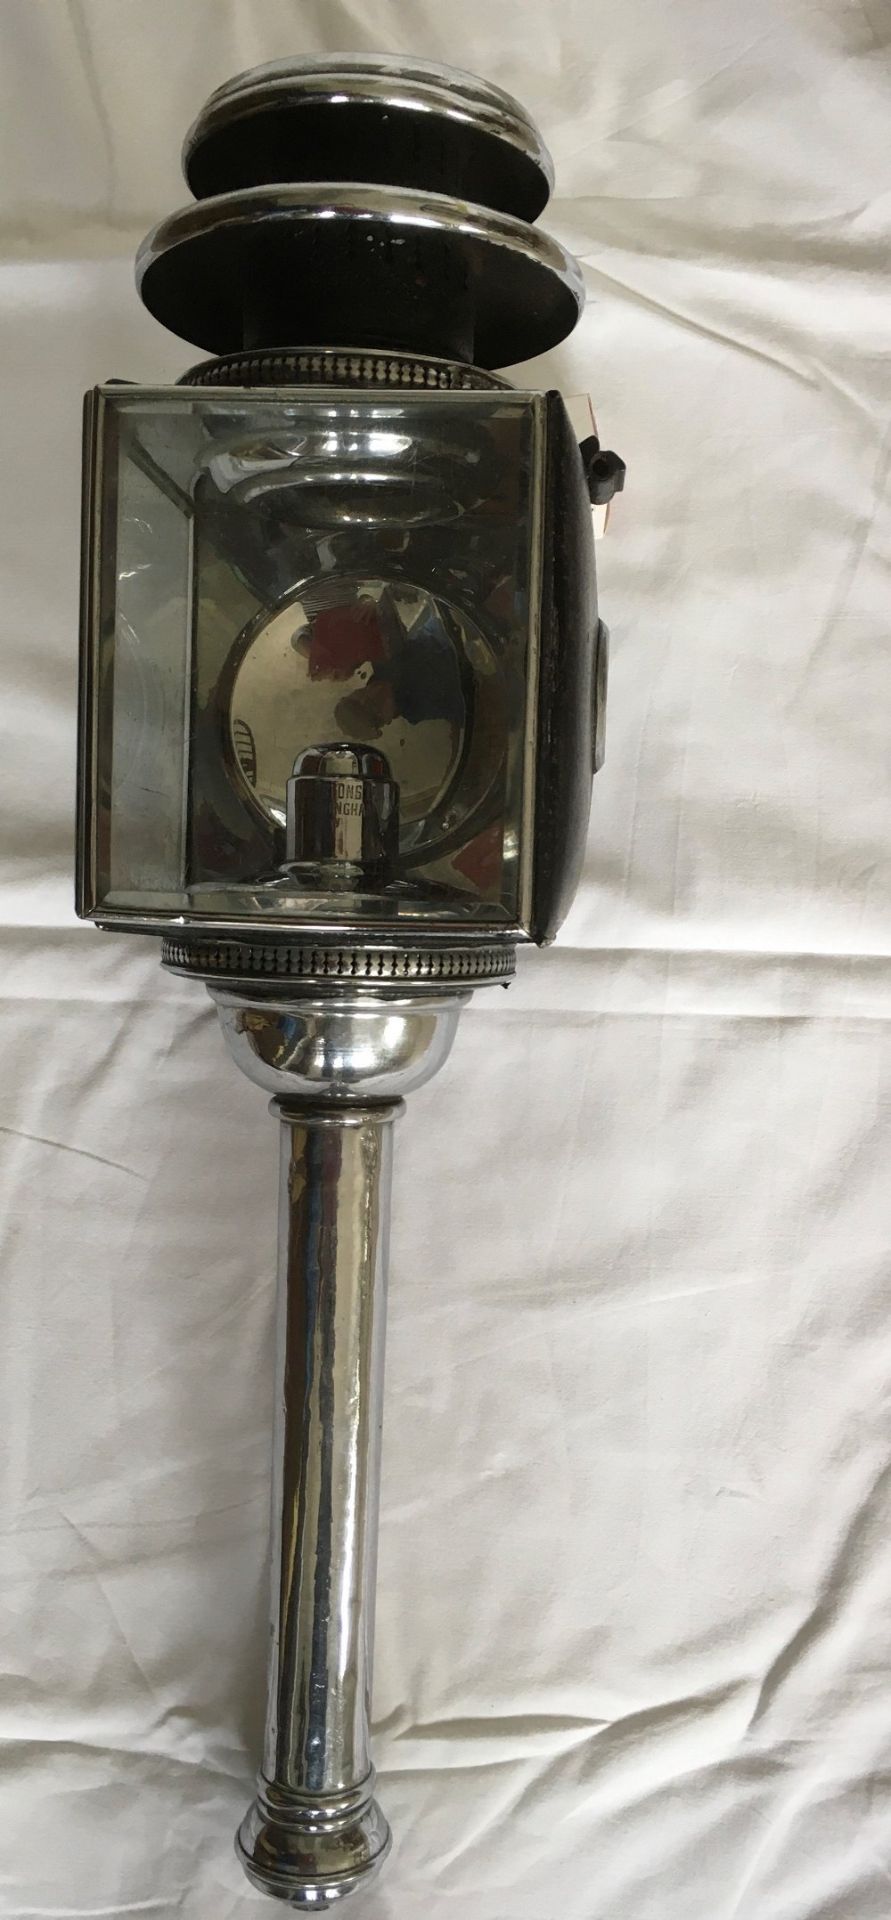 Single black/whitemetal Marston carriage lamp (view in security pen) - Image 2 of 2